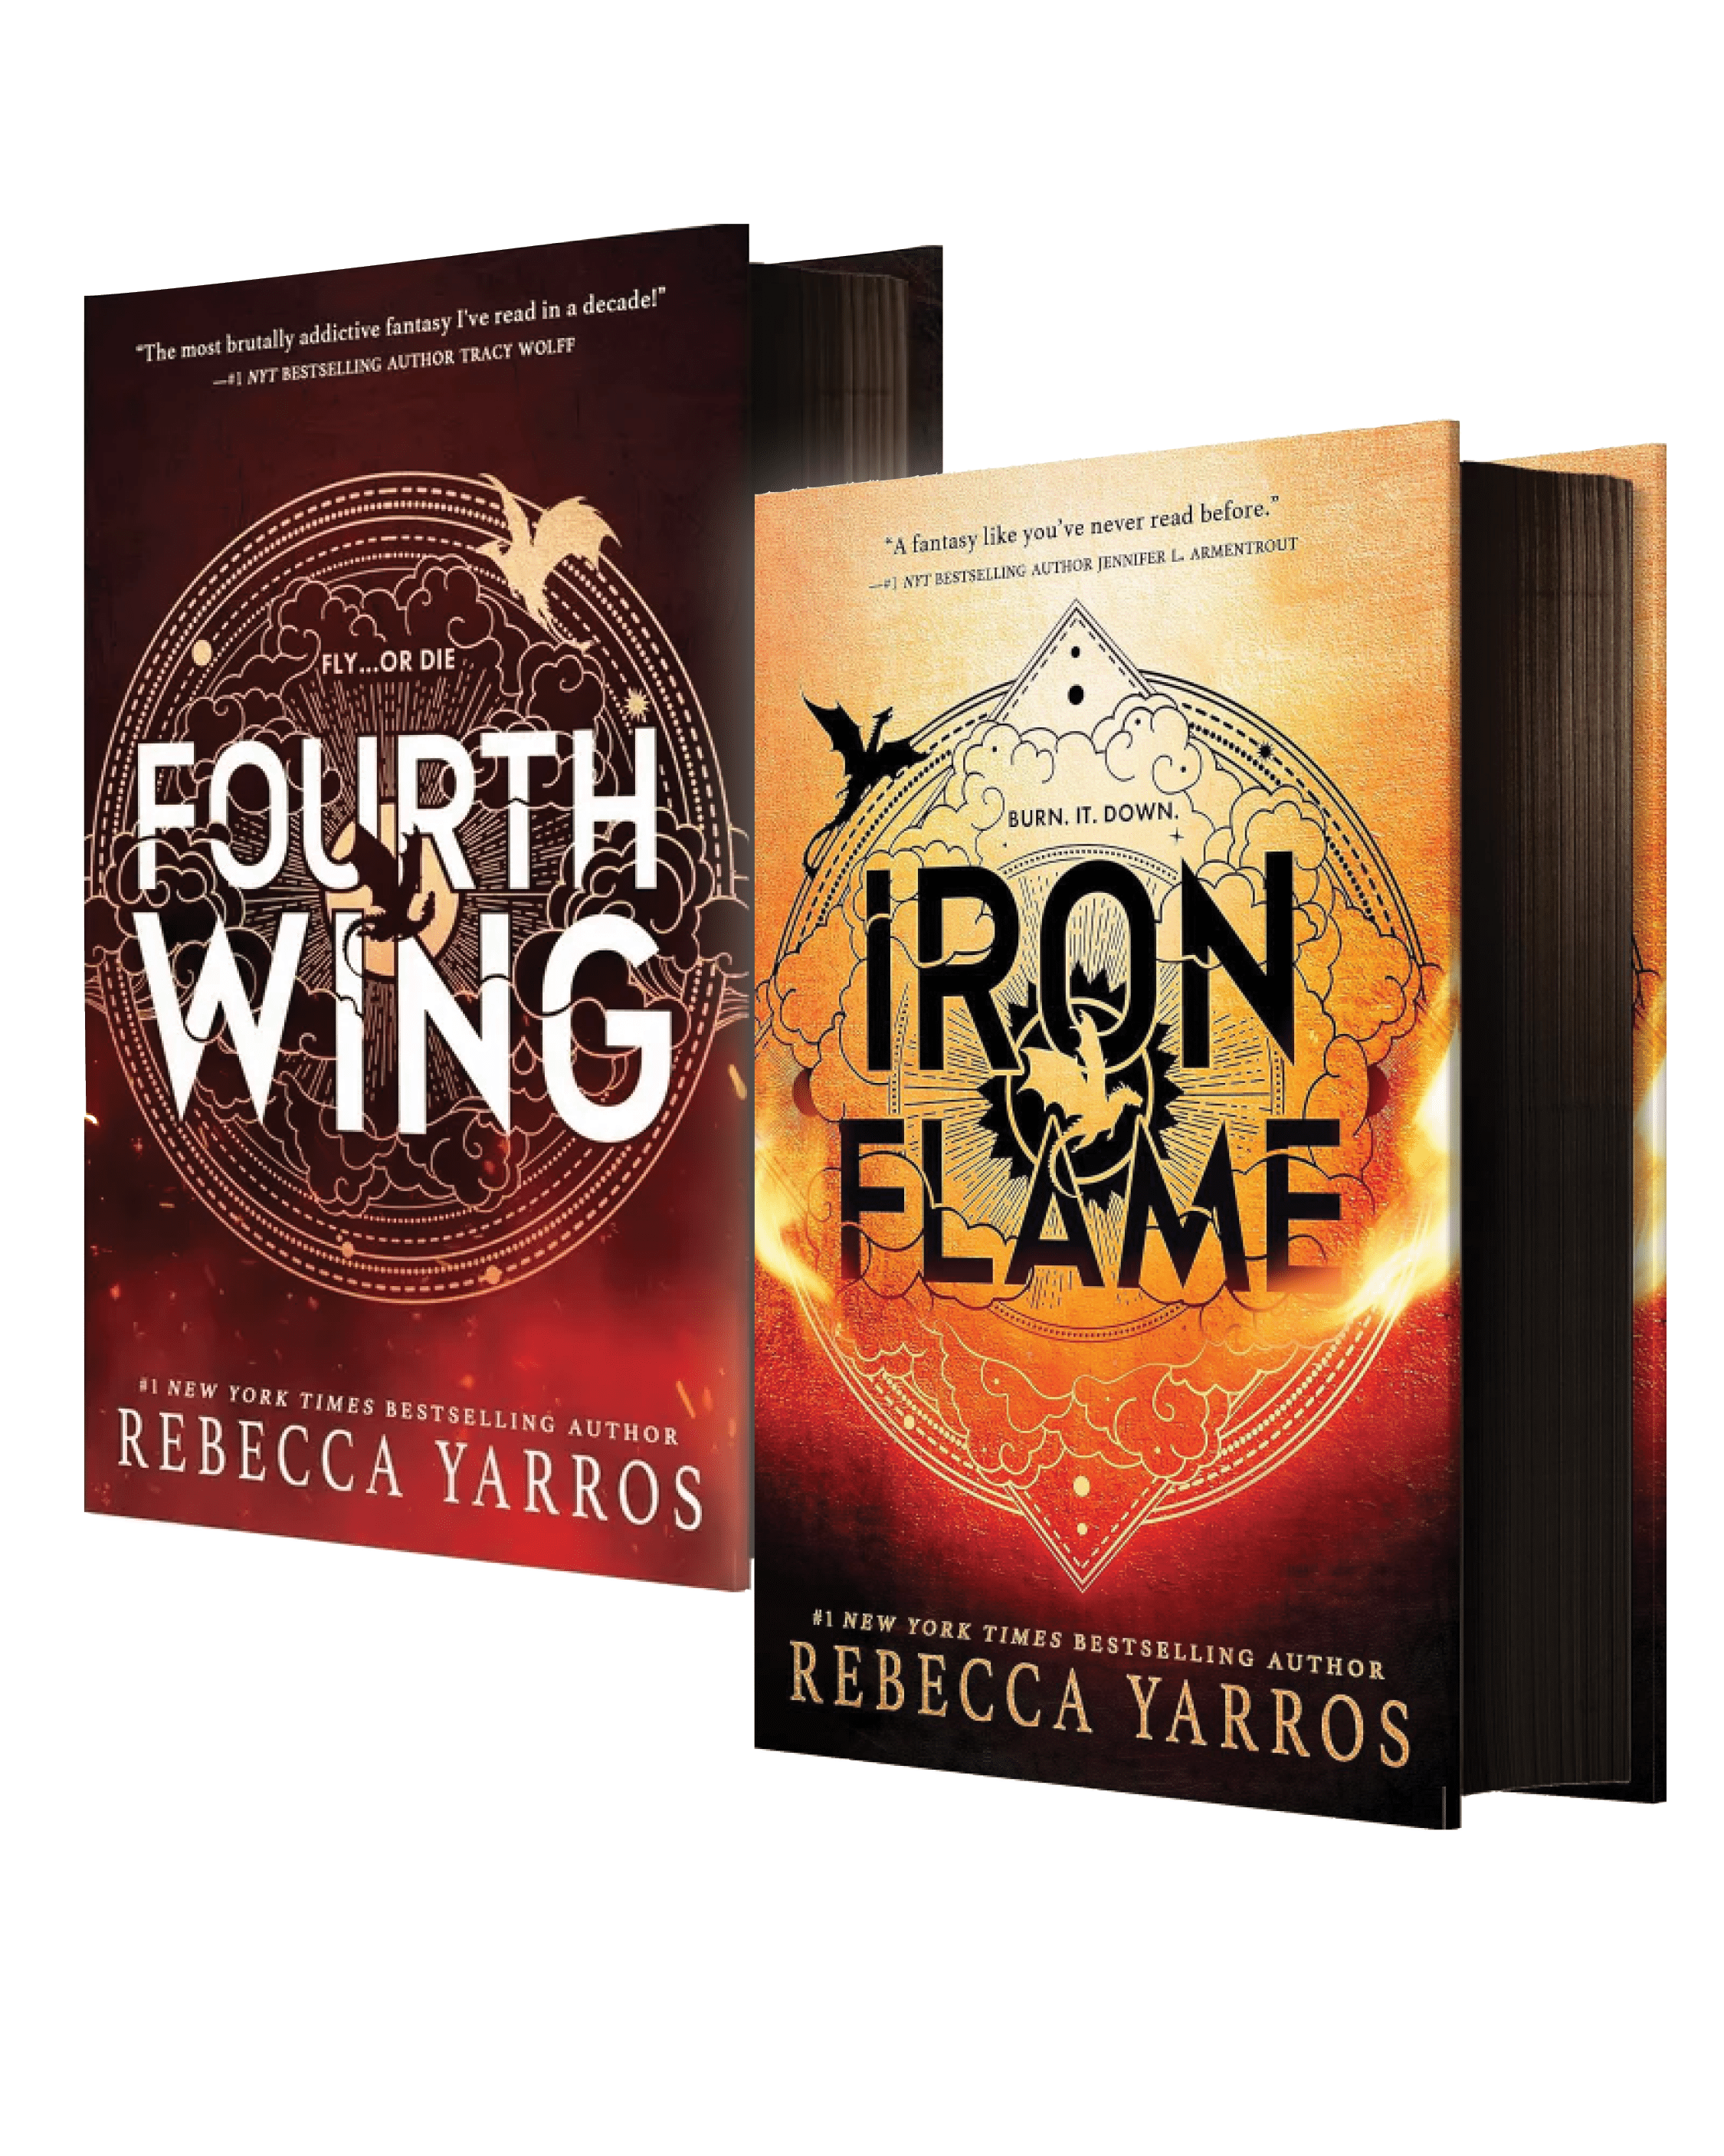 Just got my copy or iron flame! : r/fourthwing